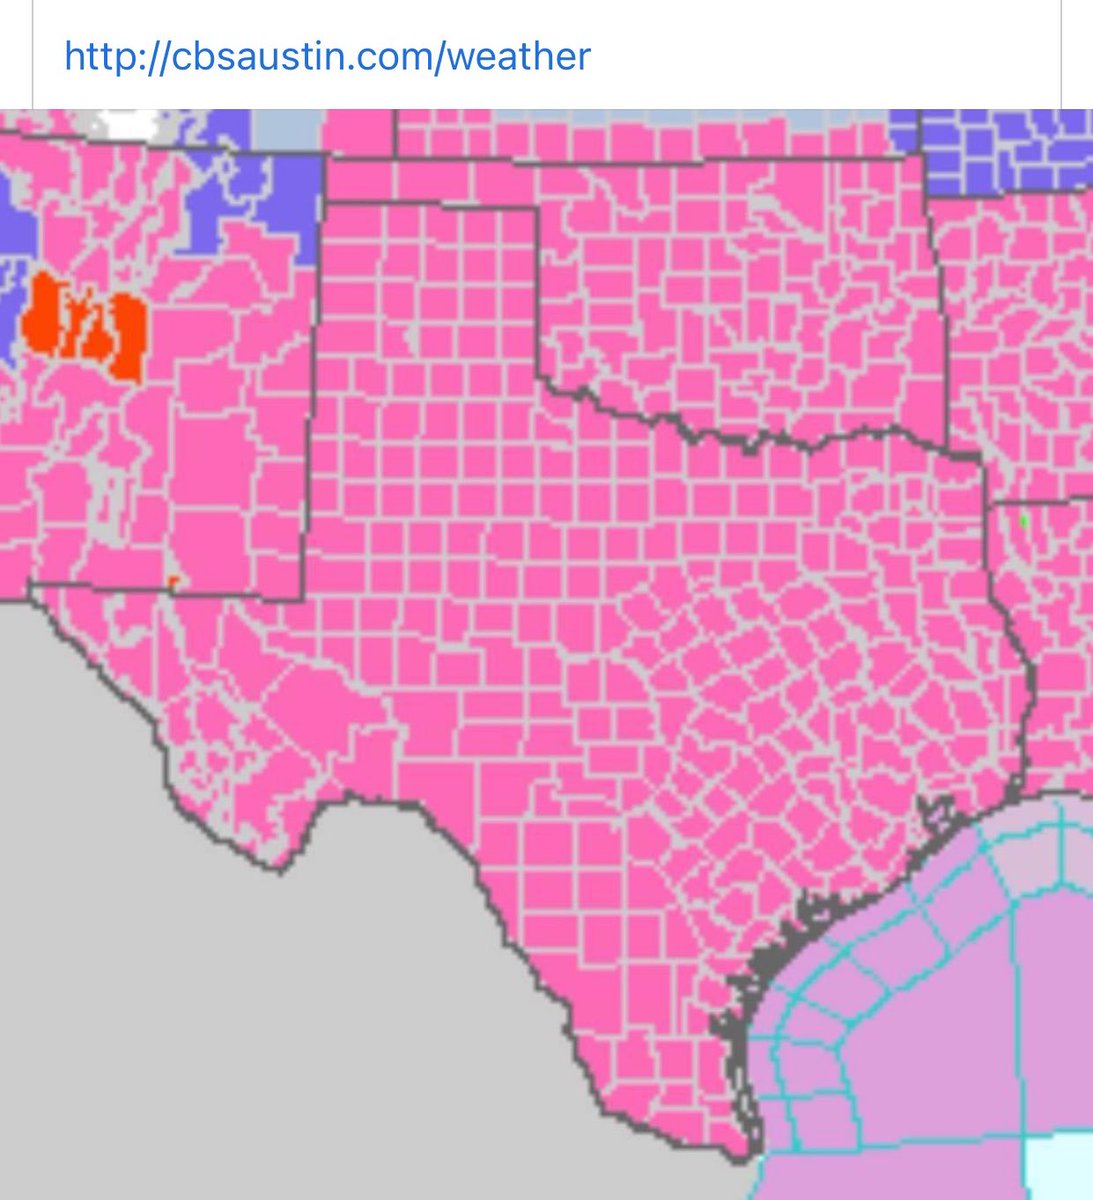 ERCOT, the Q&A thread [so far].Q: What is going on?A: The current weather event in Texas is beyond anything that we have experienced in modern memory. I don’t recall another time when all 254 counties in TX were under a winter storm warning. 1/